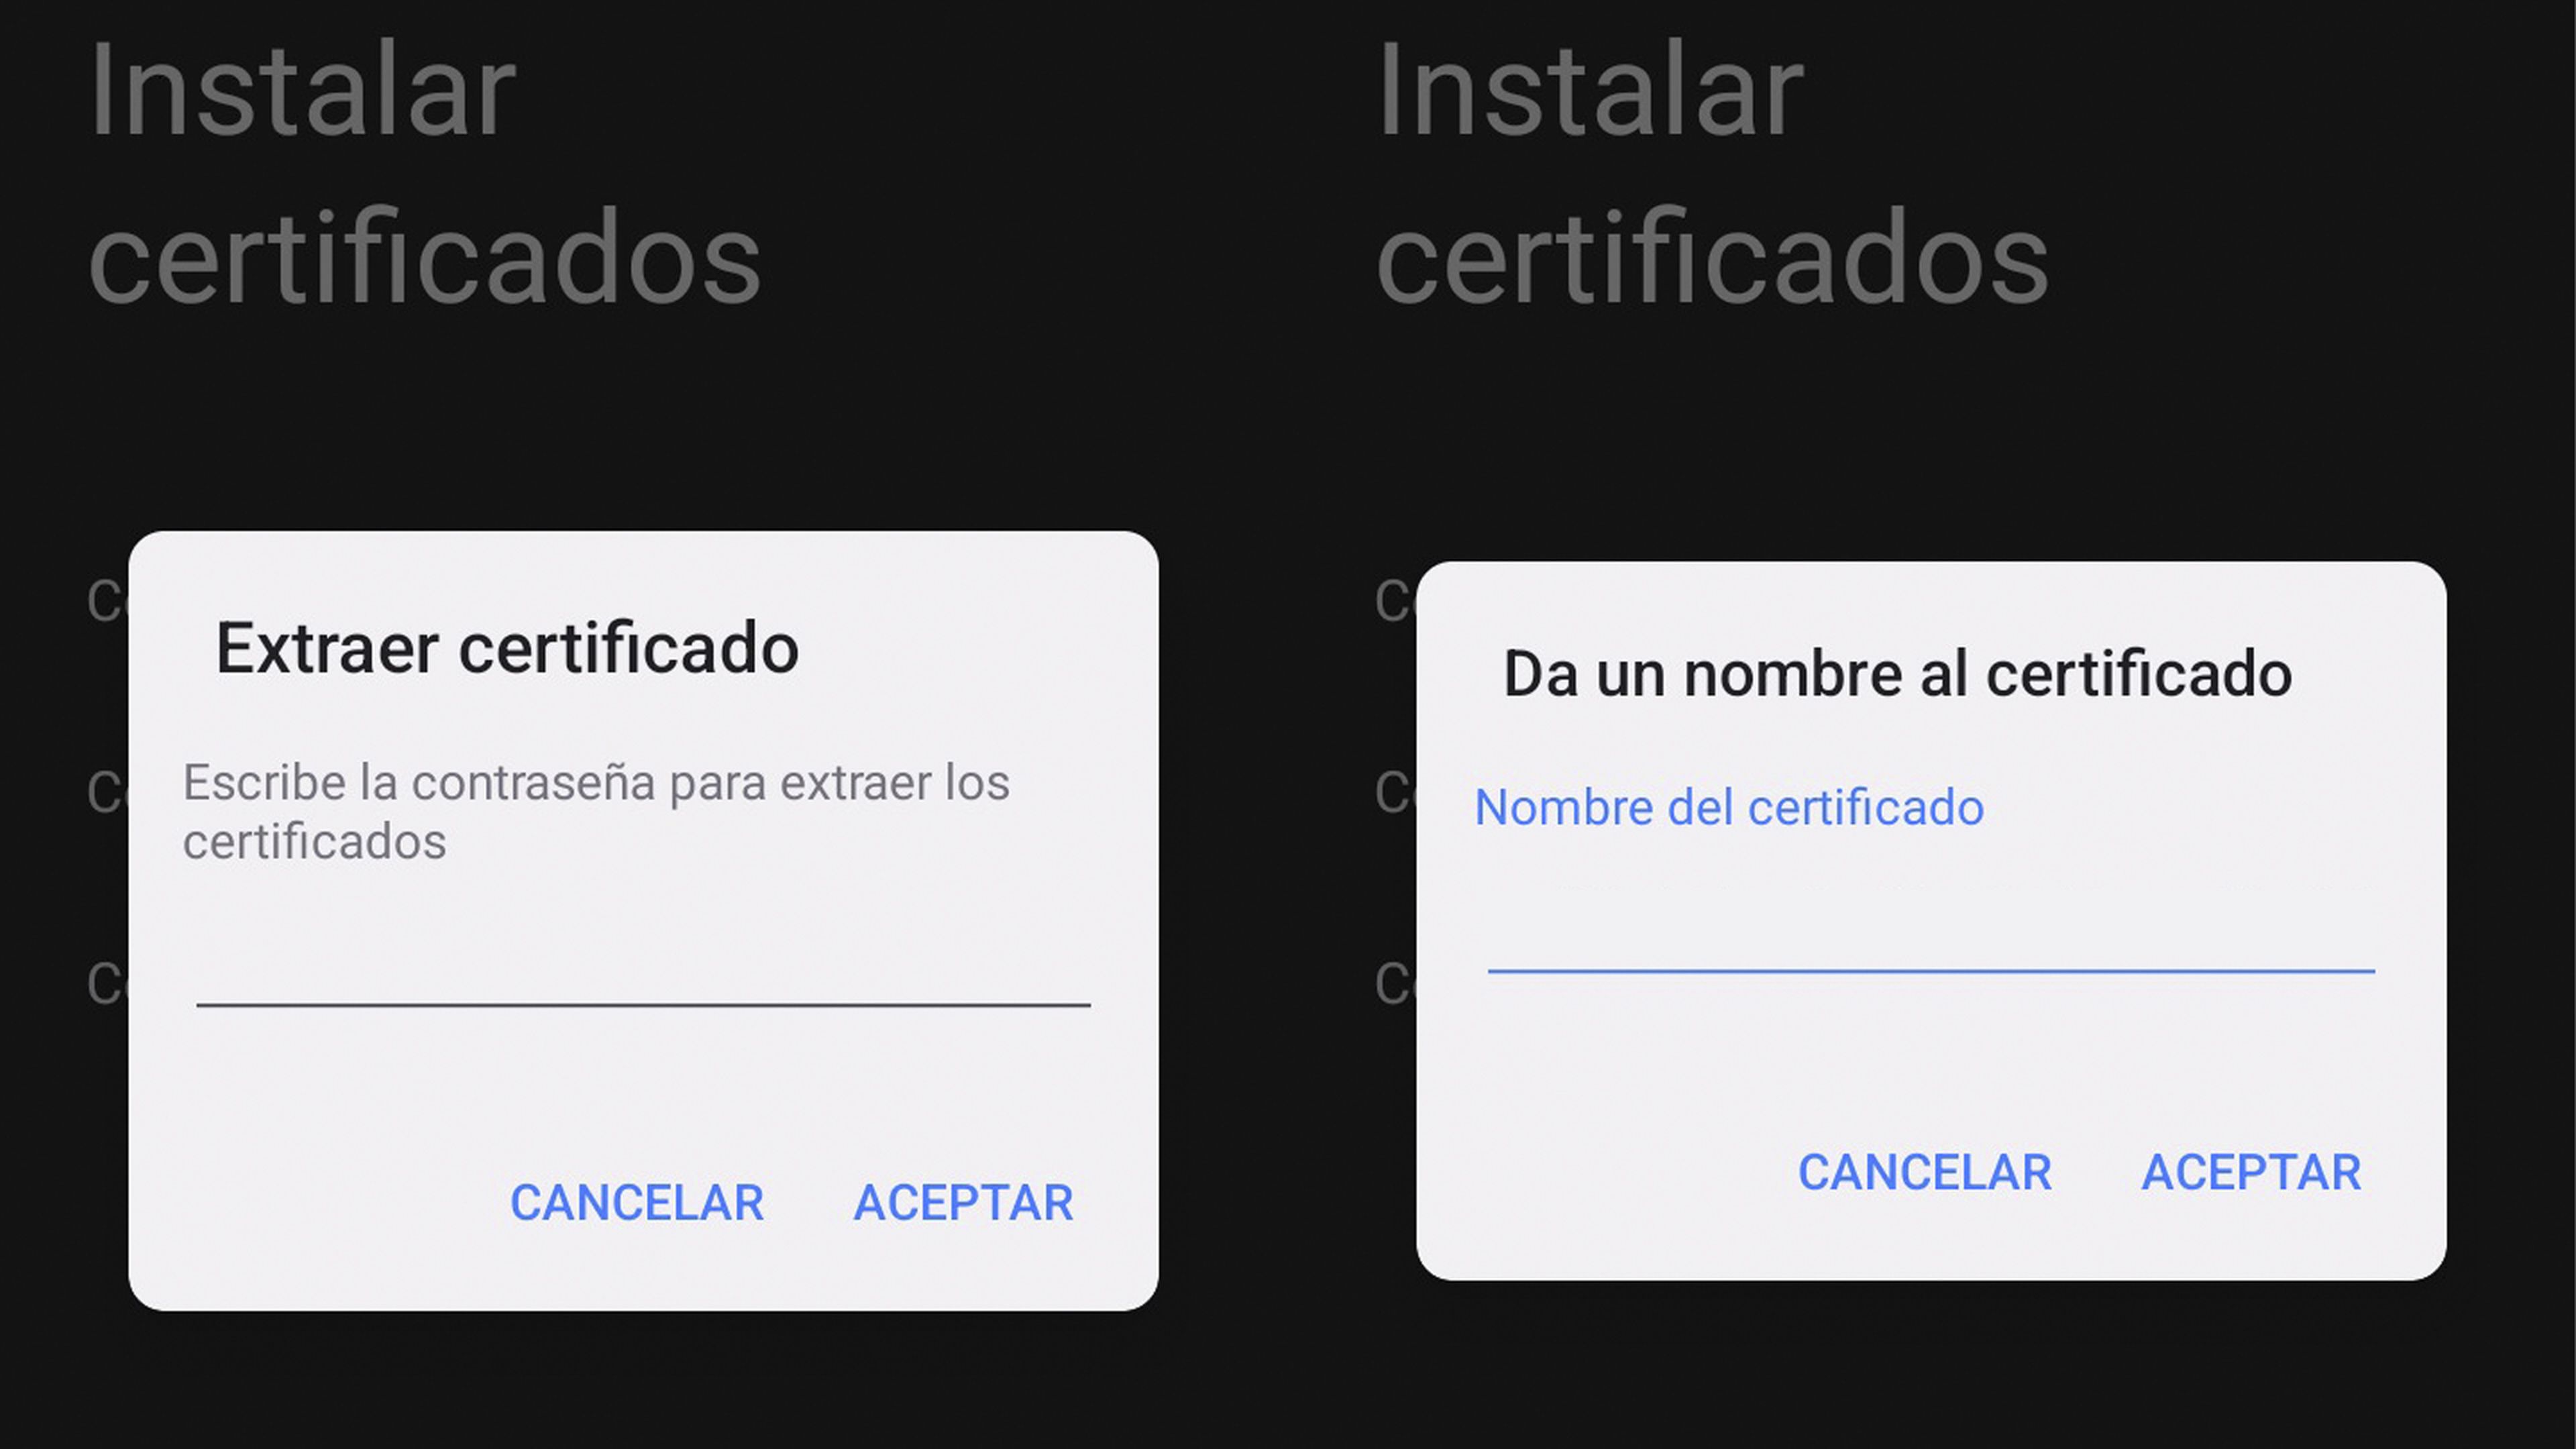 Install certificate on Android